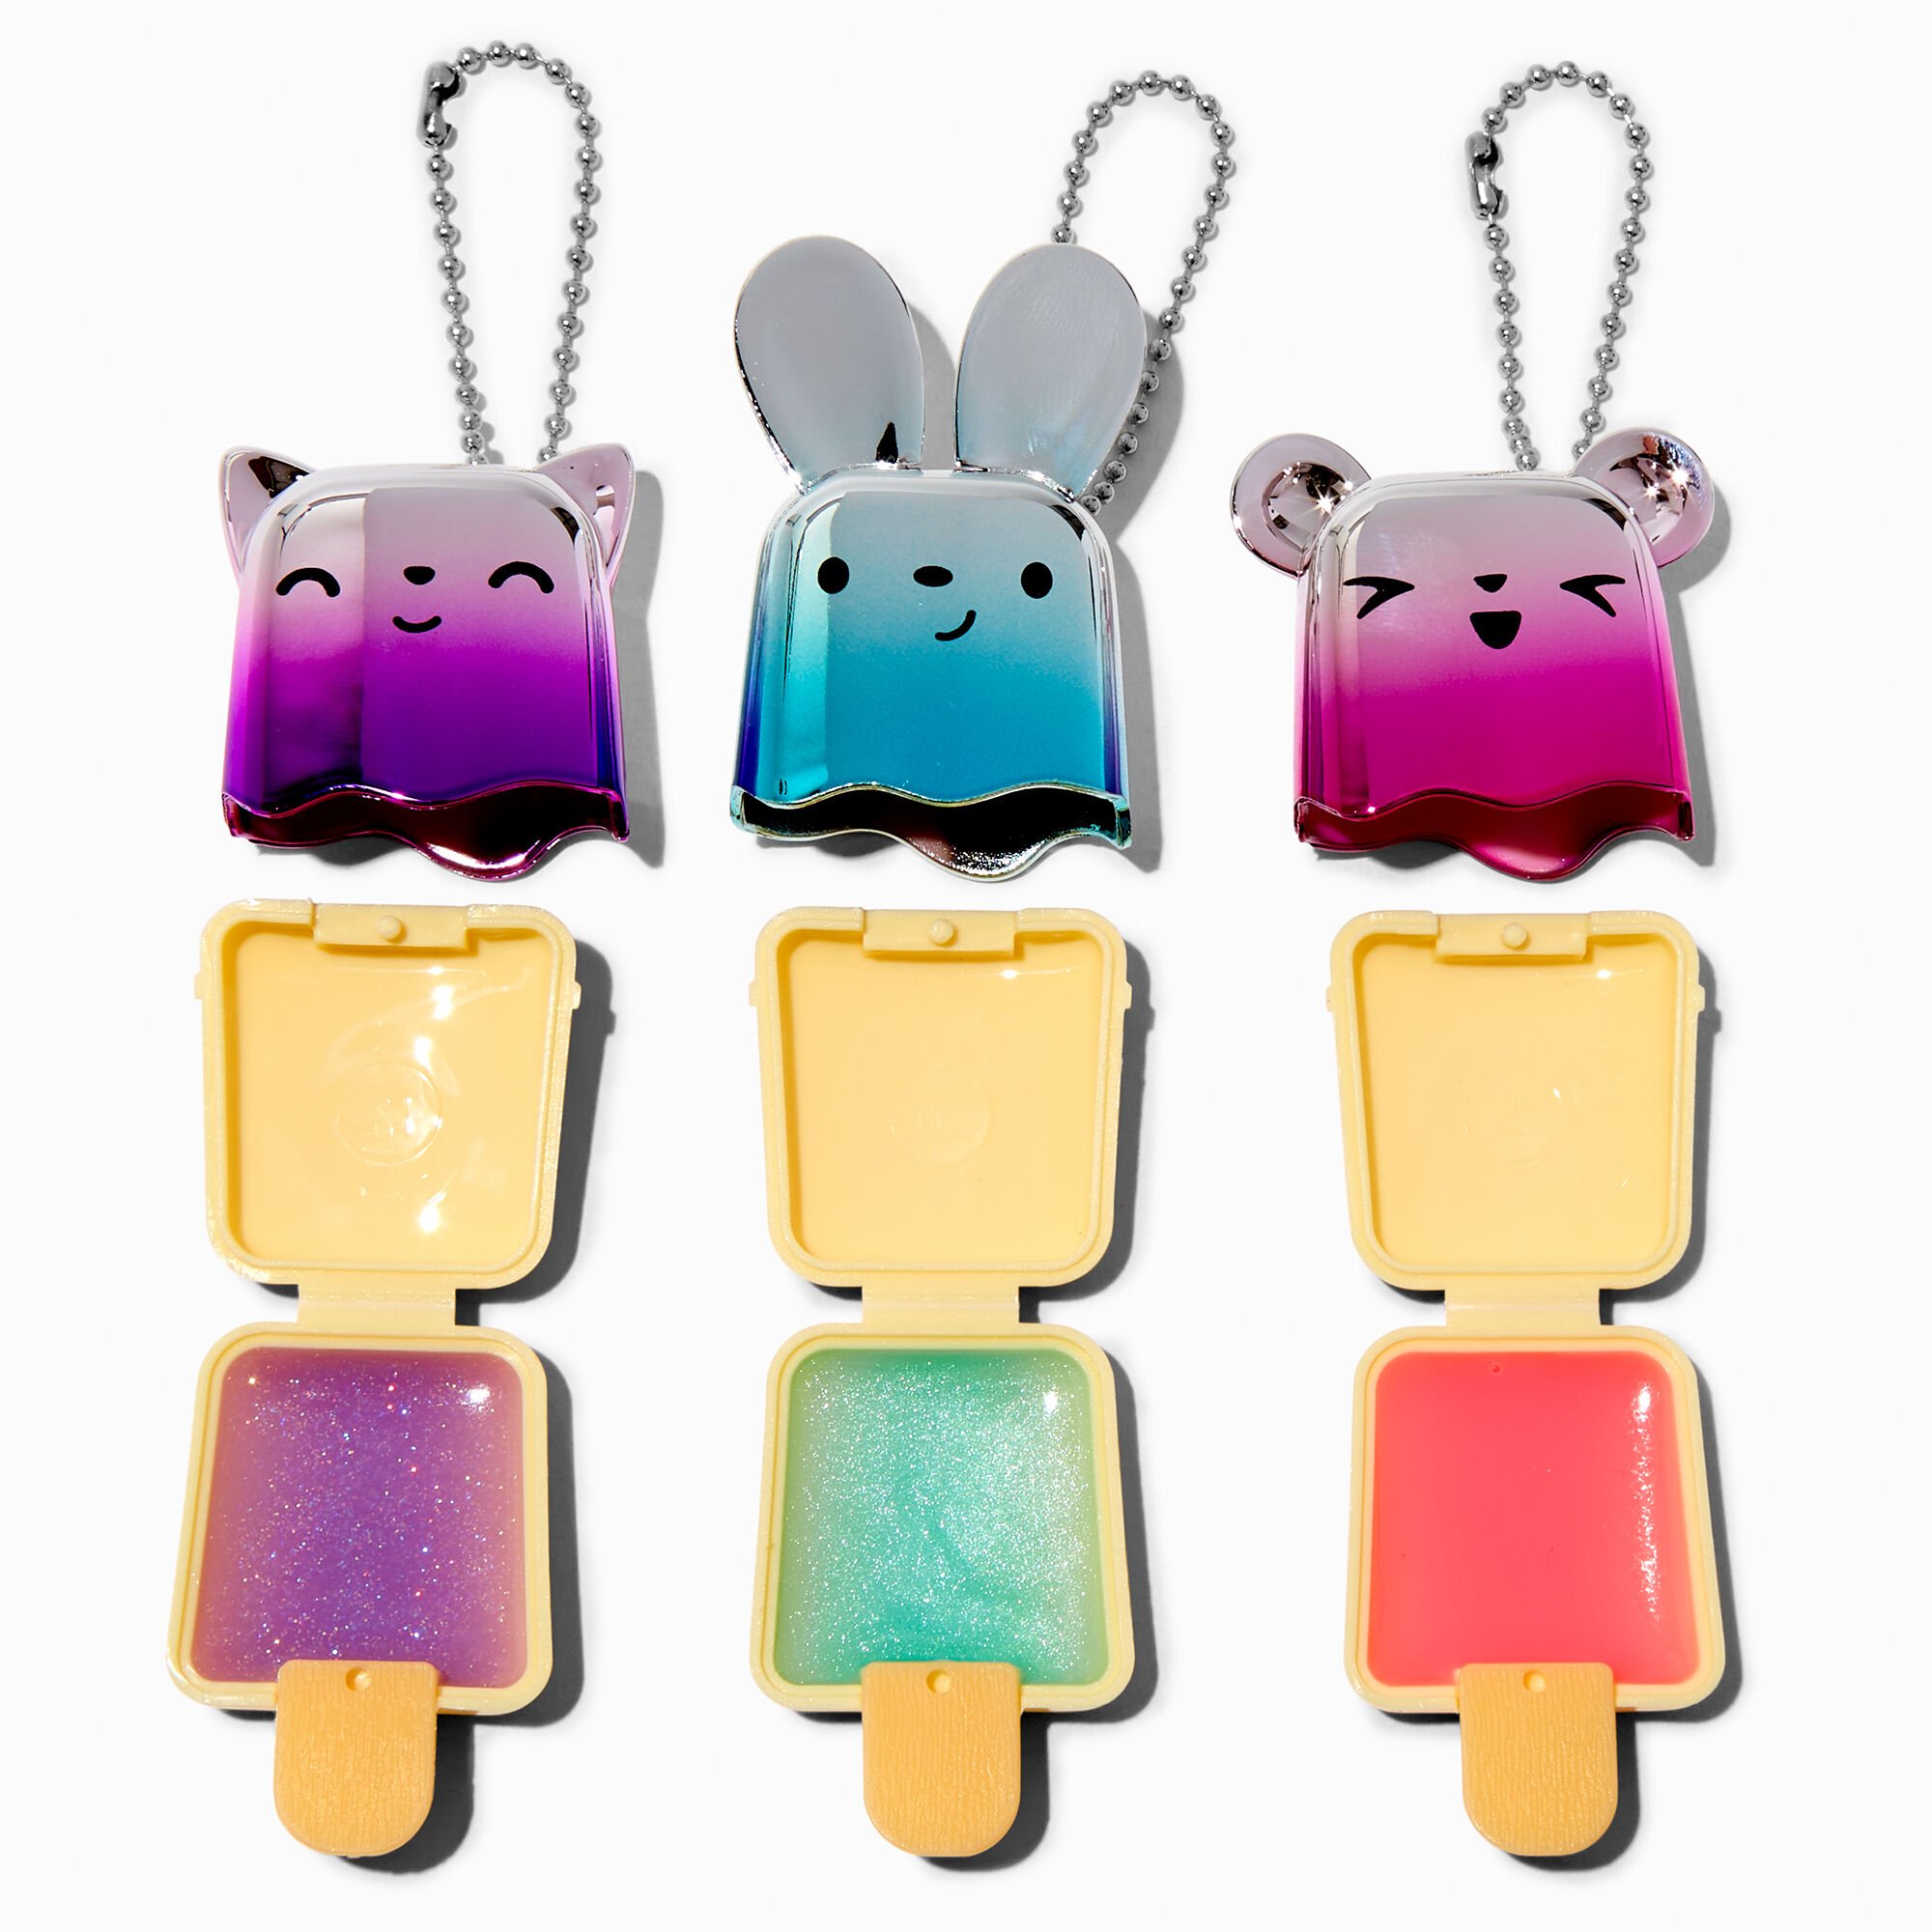 View Claires Pucker Pops Chrome Bear Lip Gloss Set 3 Pack information